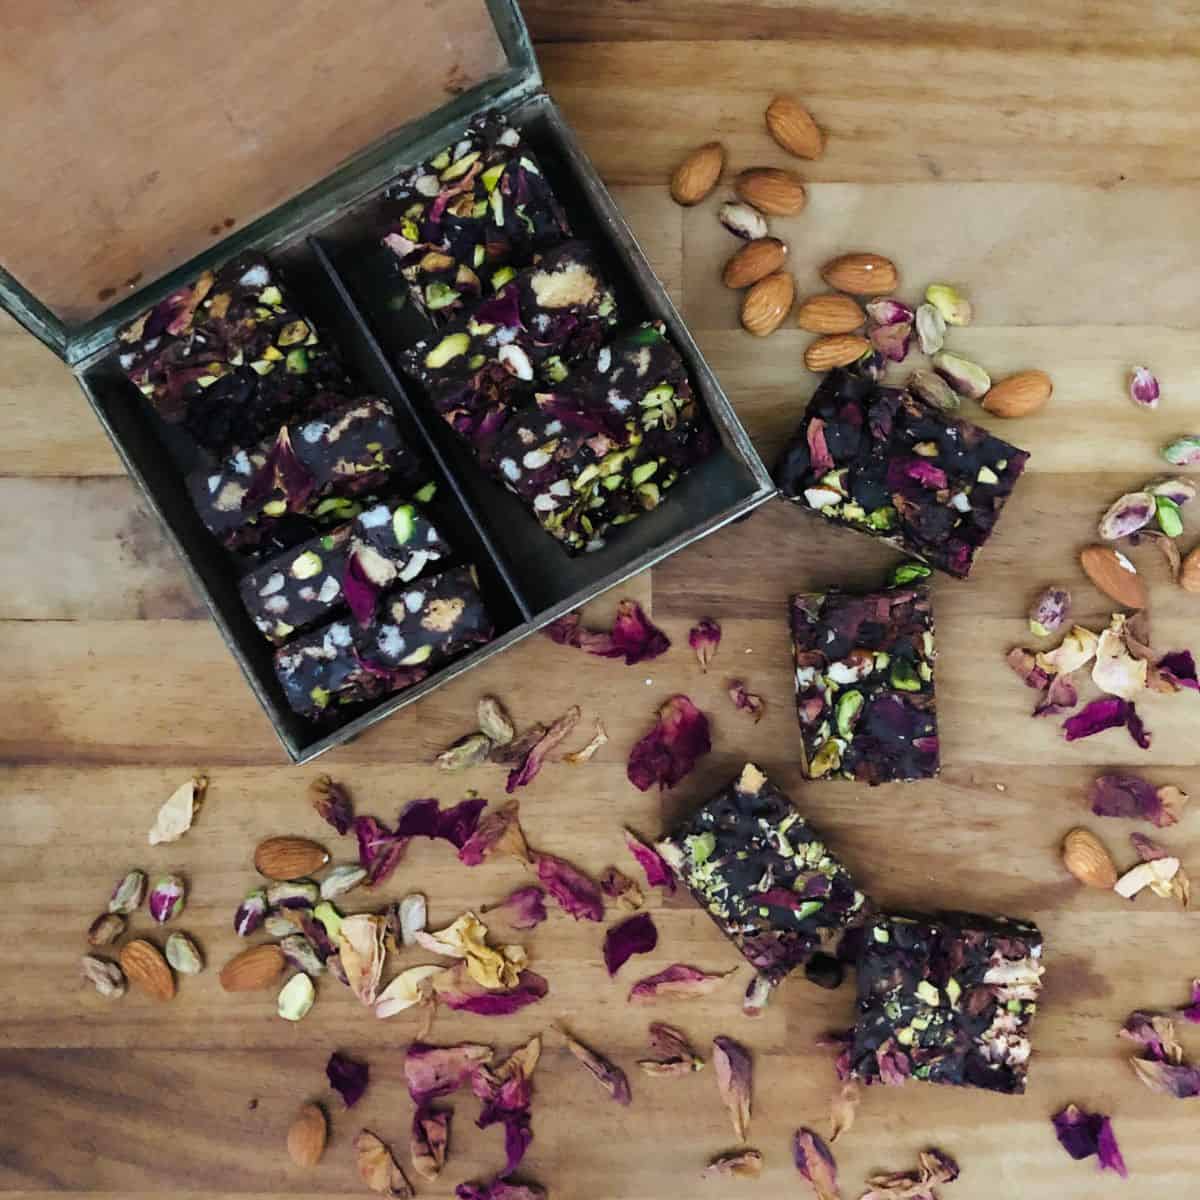 Slices of rocky road on a wooden chopping board and in a small metal box.